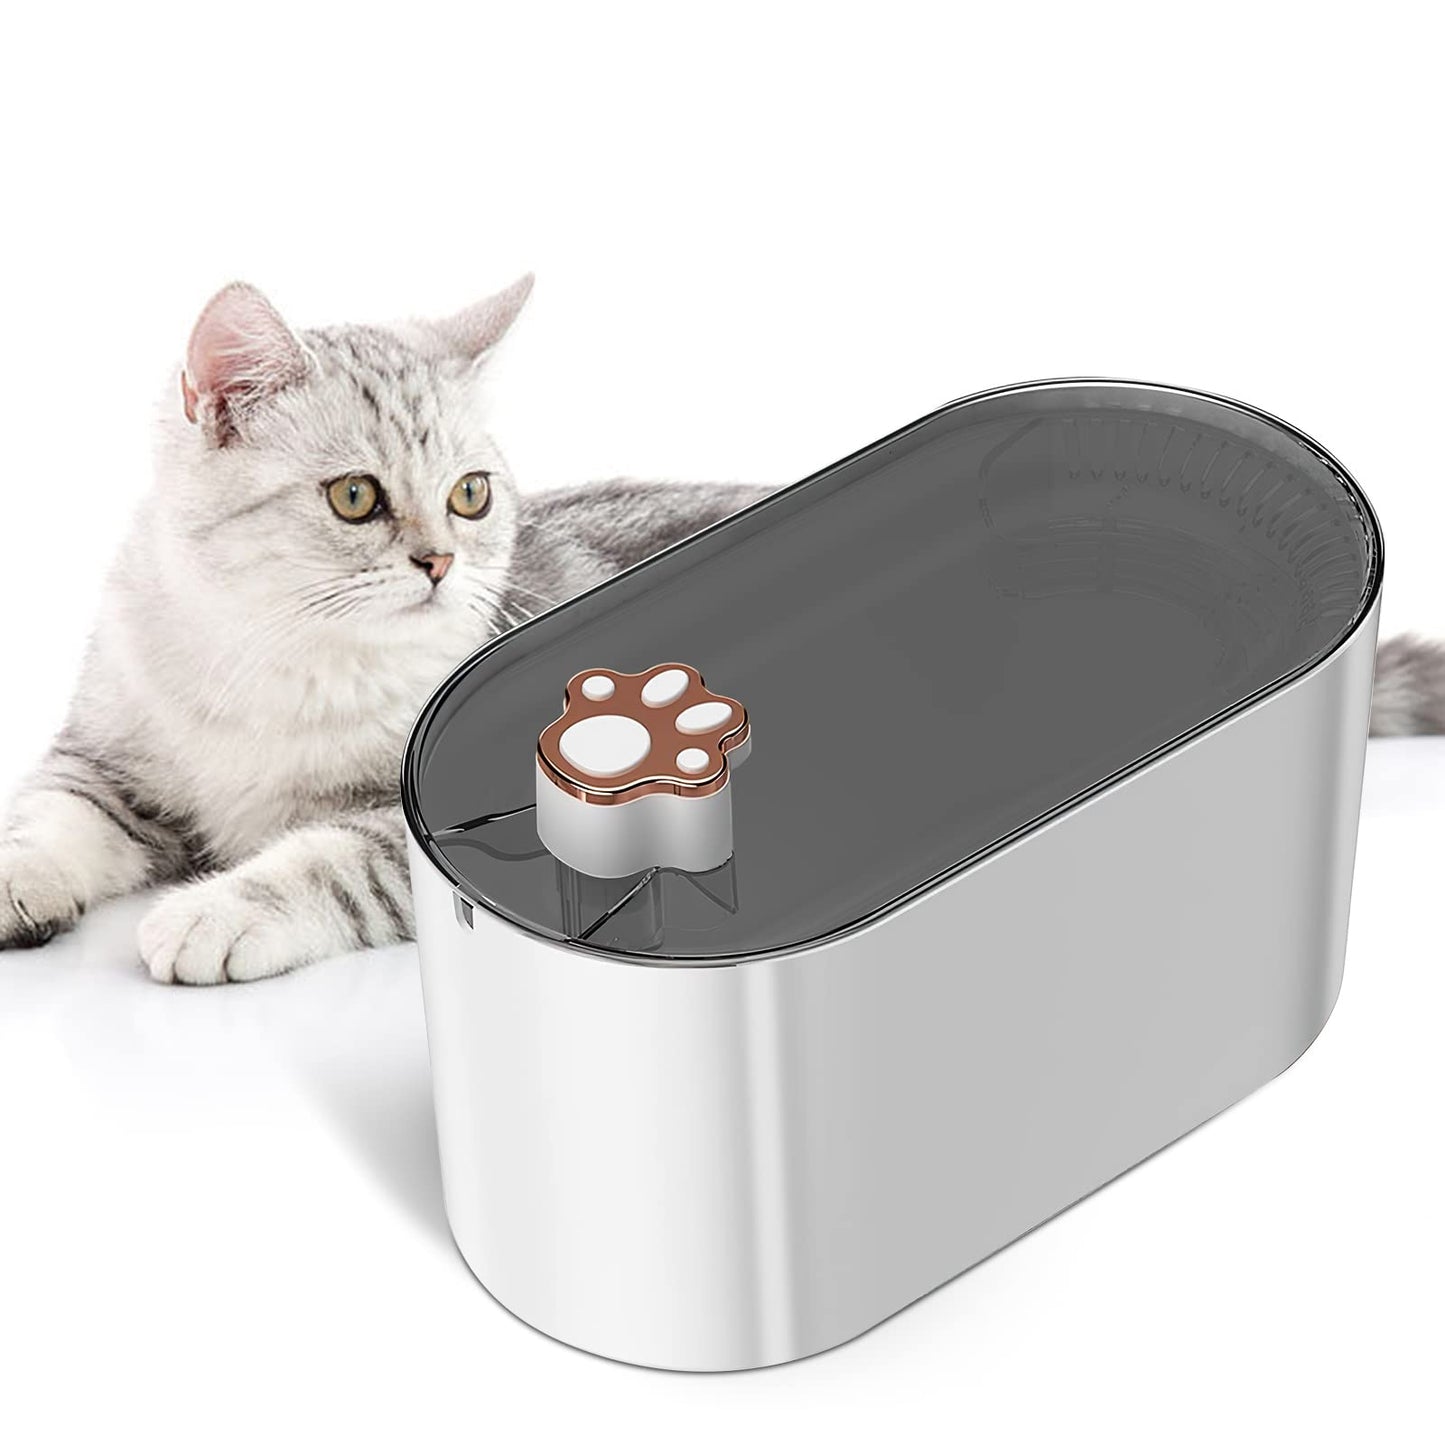 3L Automatic Cat Water Fountain - Ultra-Quiet & Stylish